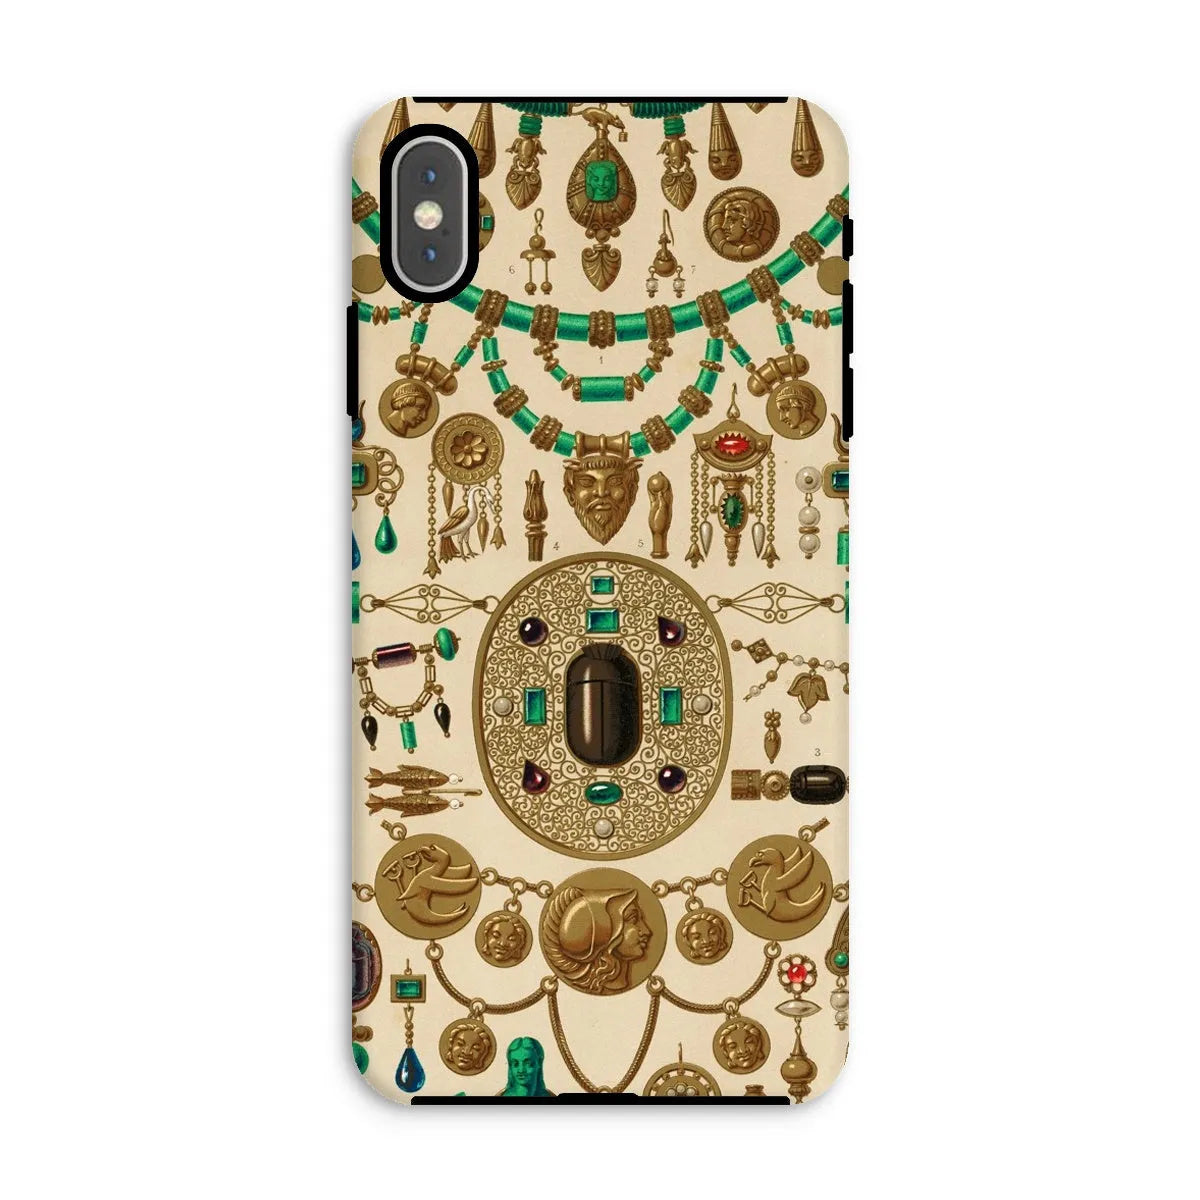 Etruscan Patterns From L’ornement Polychrome By Auguste Racinet Tough Phone Case - Iphone Xs Max / Matte - Mobile